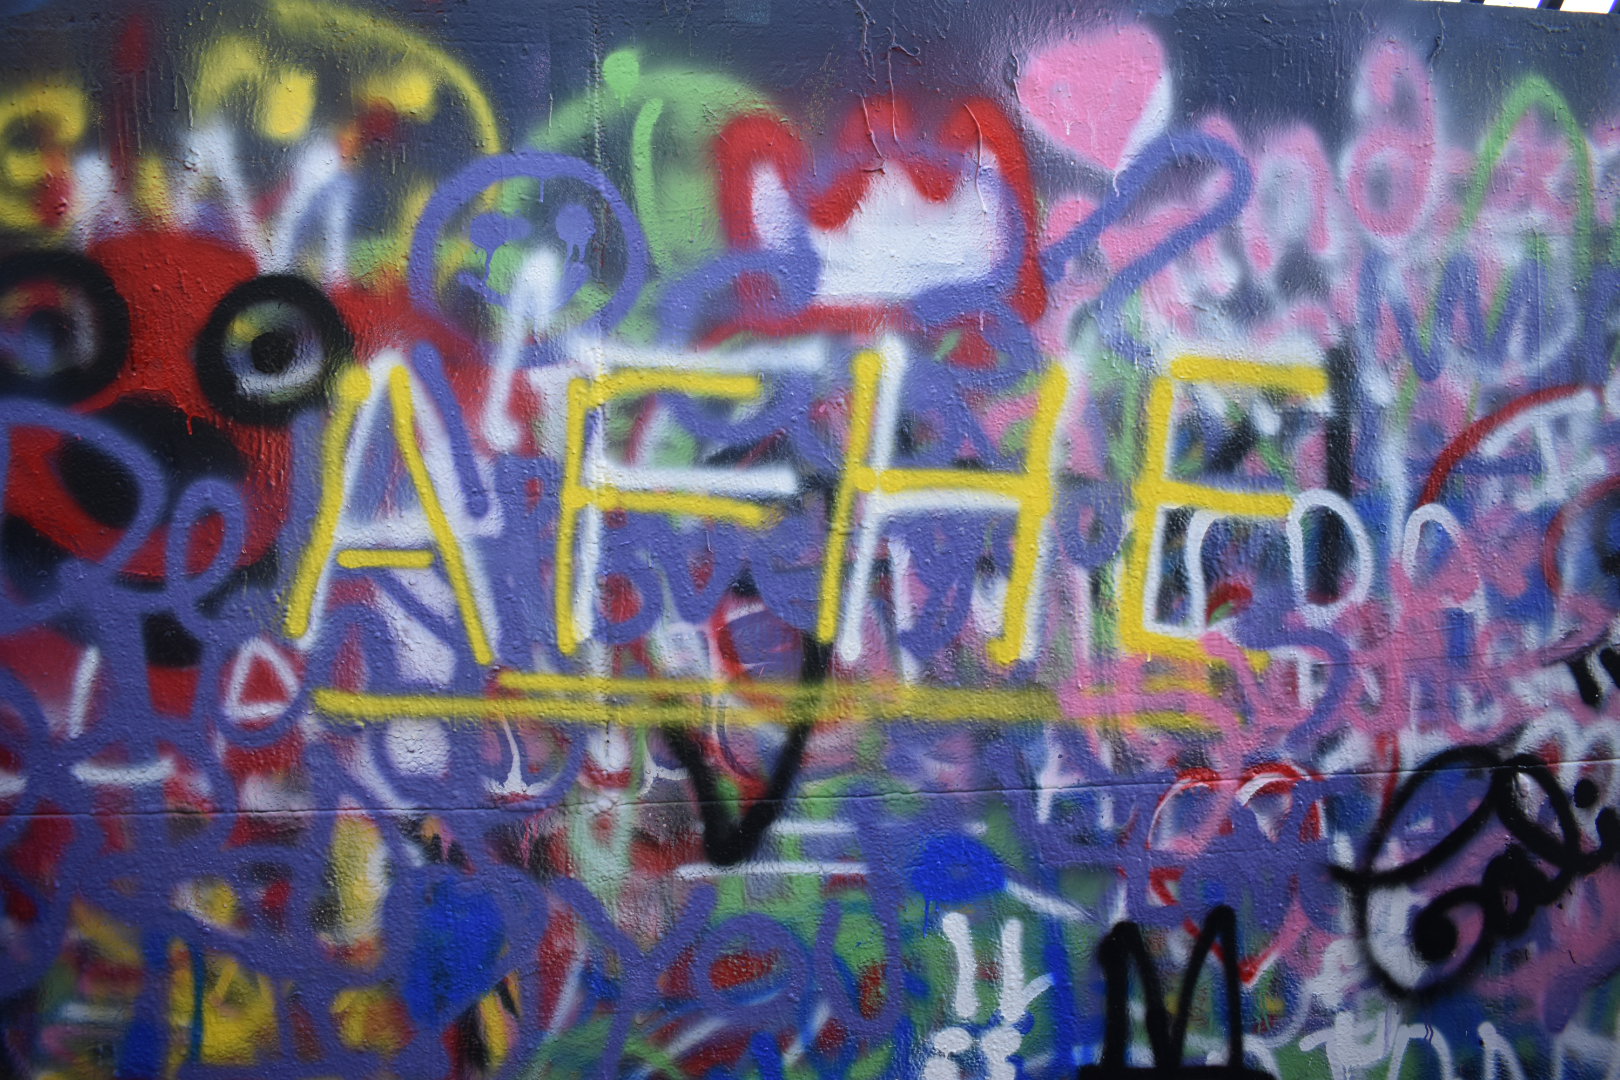 Painted letters A, F, H and E on a graffiti wall